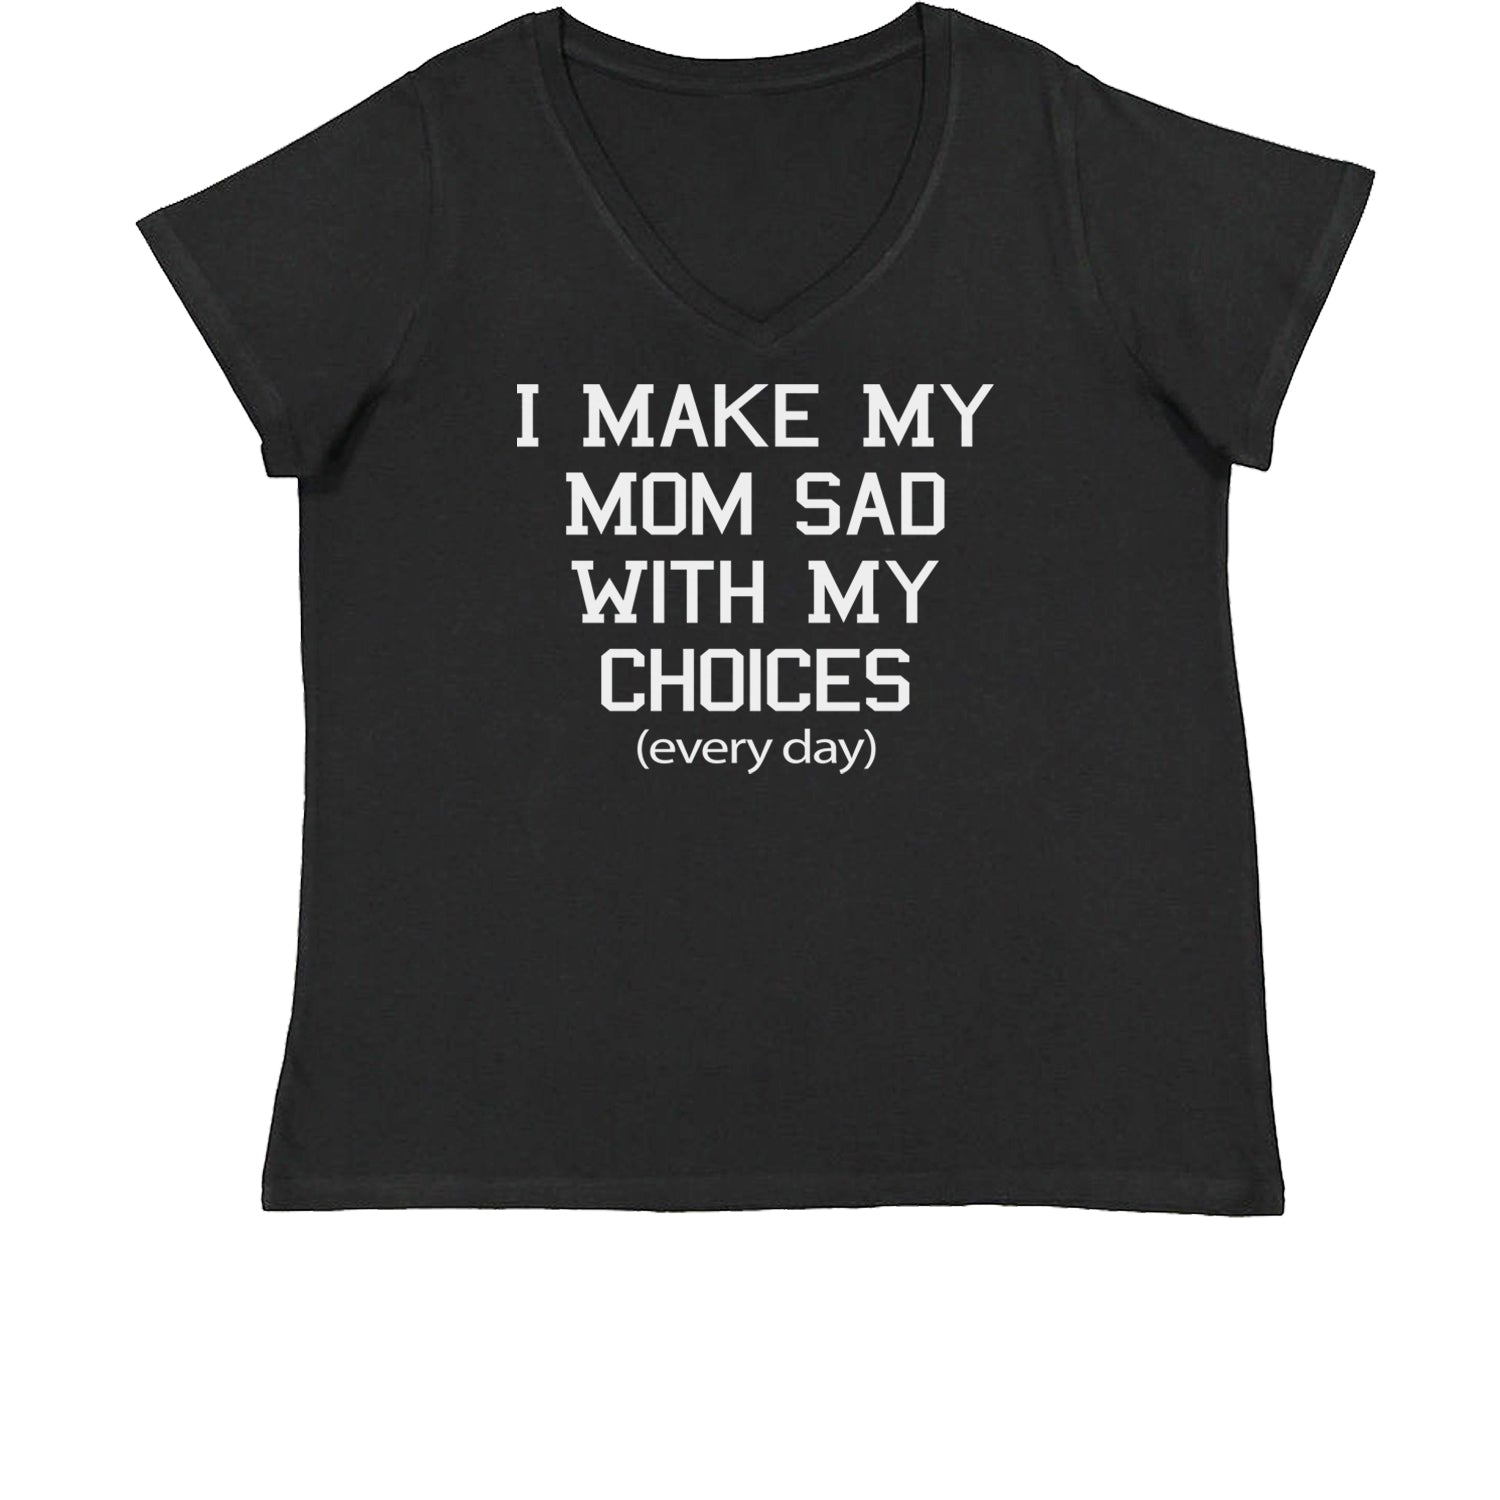 I Make My Mom Sad With My Choices Every Day Womens Plus Size V-Neck T-shirt funny, ironic, meme by Expression Tees